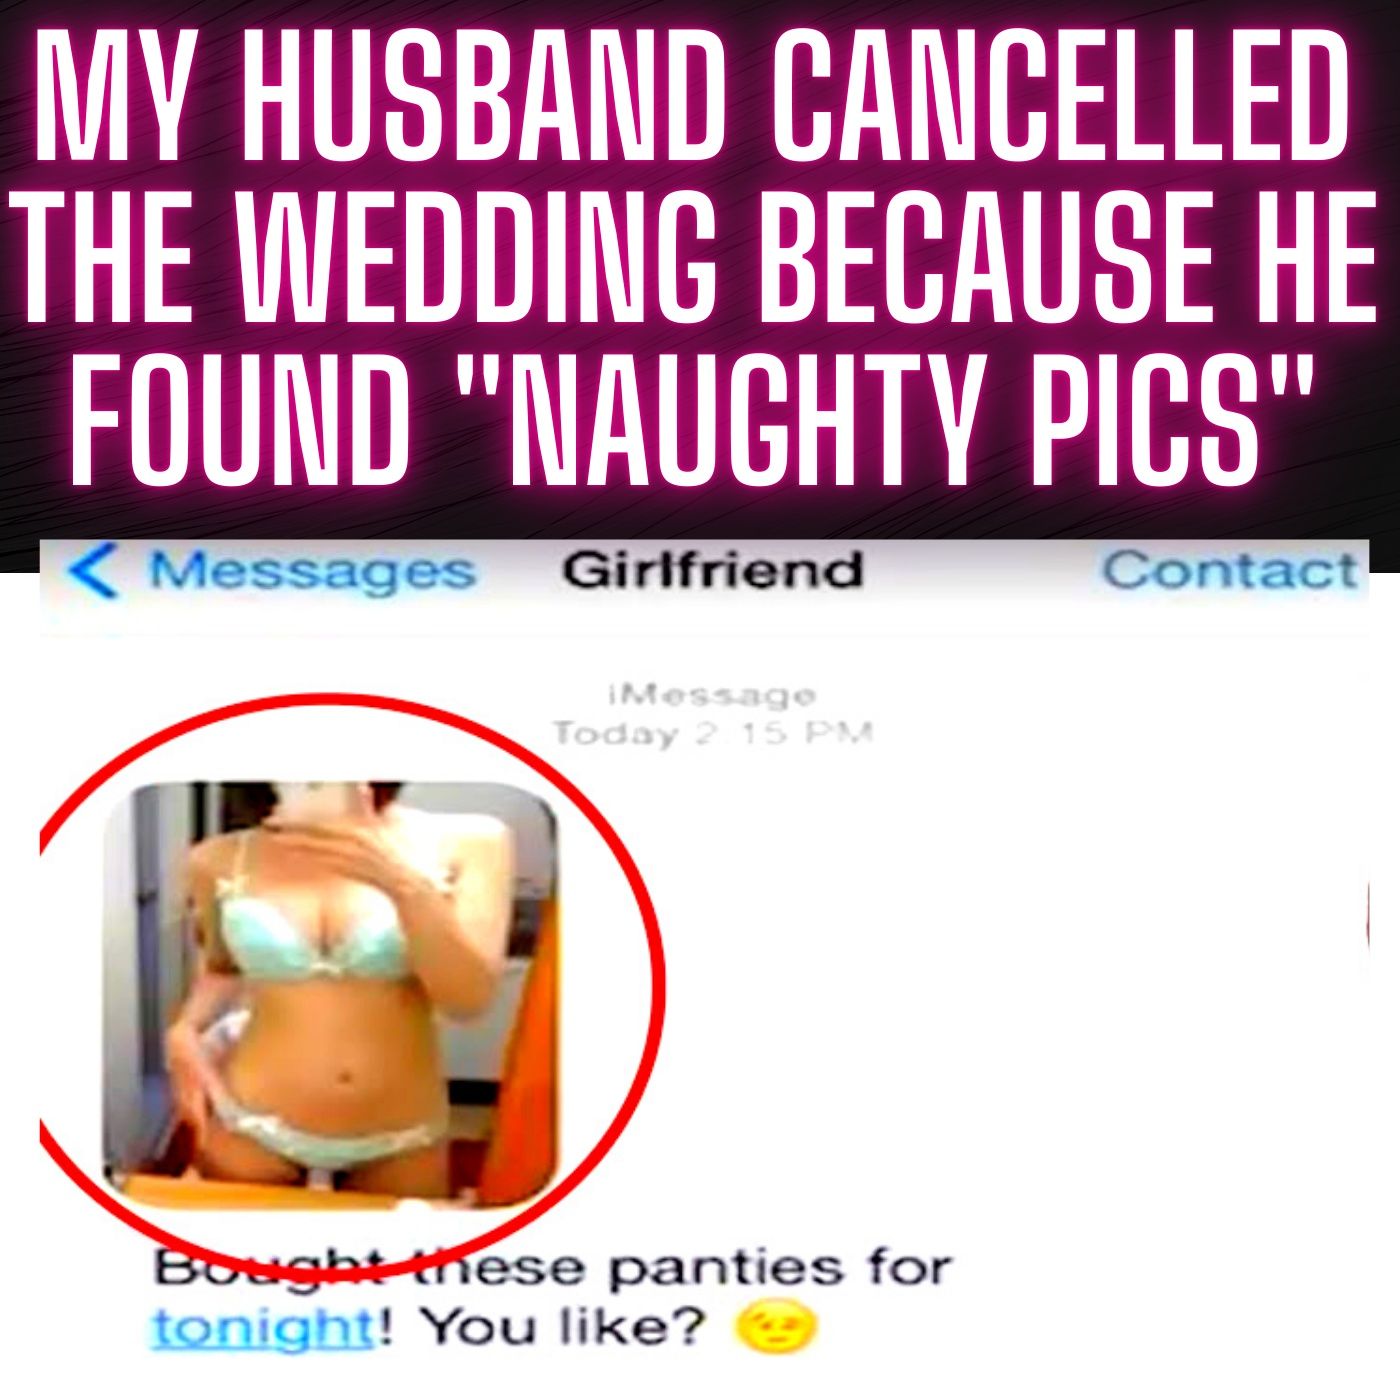 My Husband Cancelled The Wedding Because He Found 